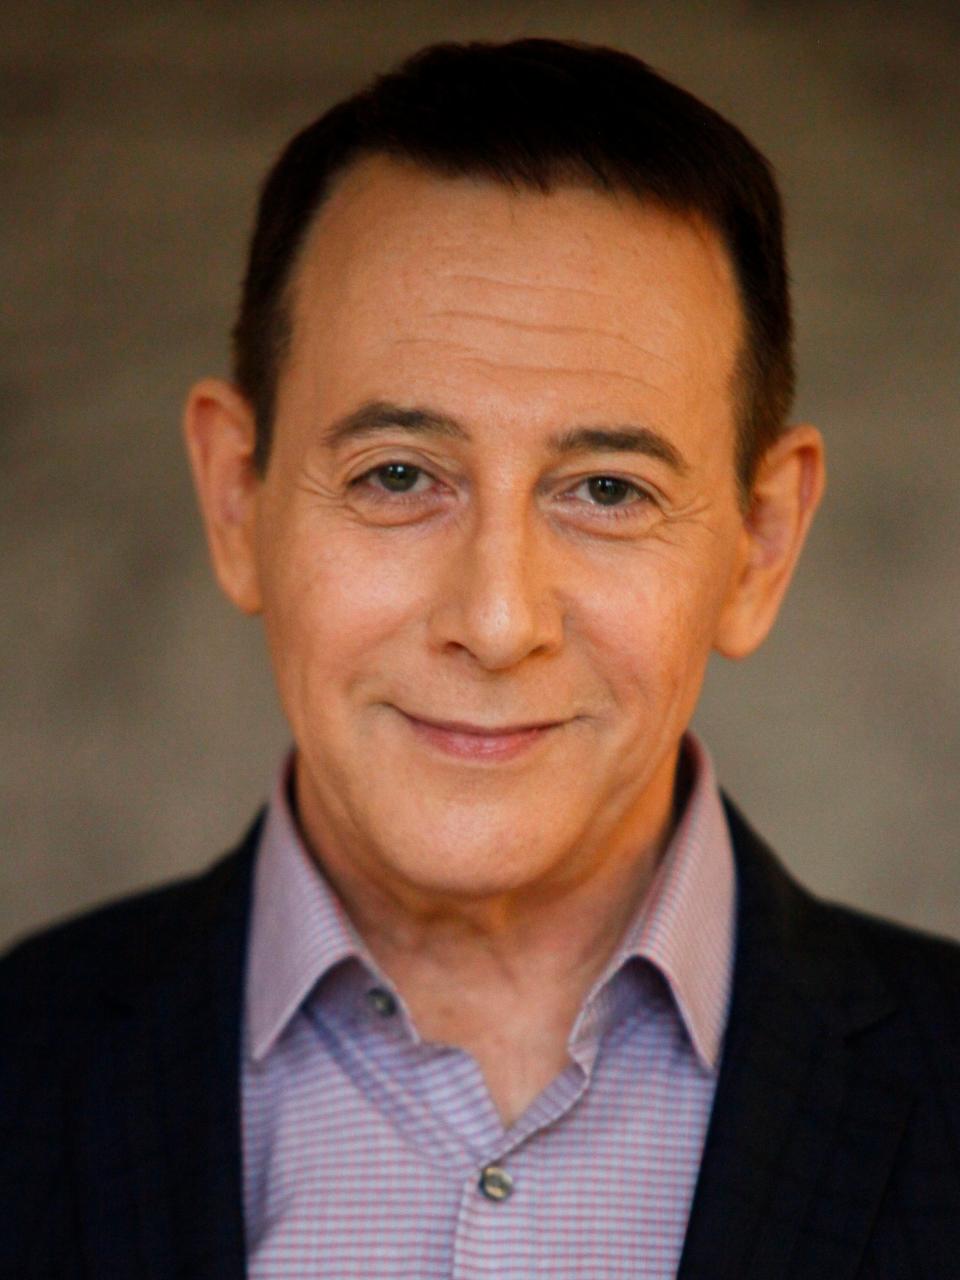 Actor Paul Reubens, who grew up in Sarasota and went on to create the iconic character Pee-wee Herman, died July 30 in Los Angeles at age 70.